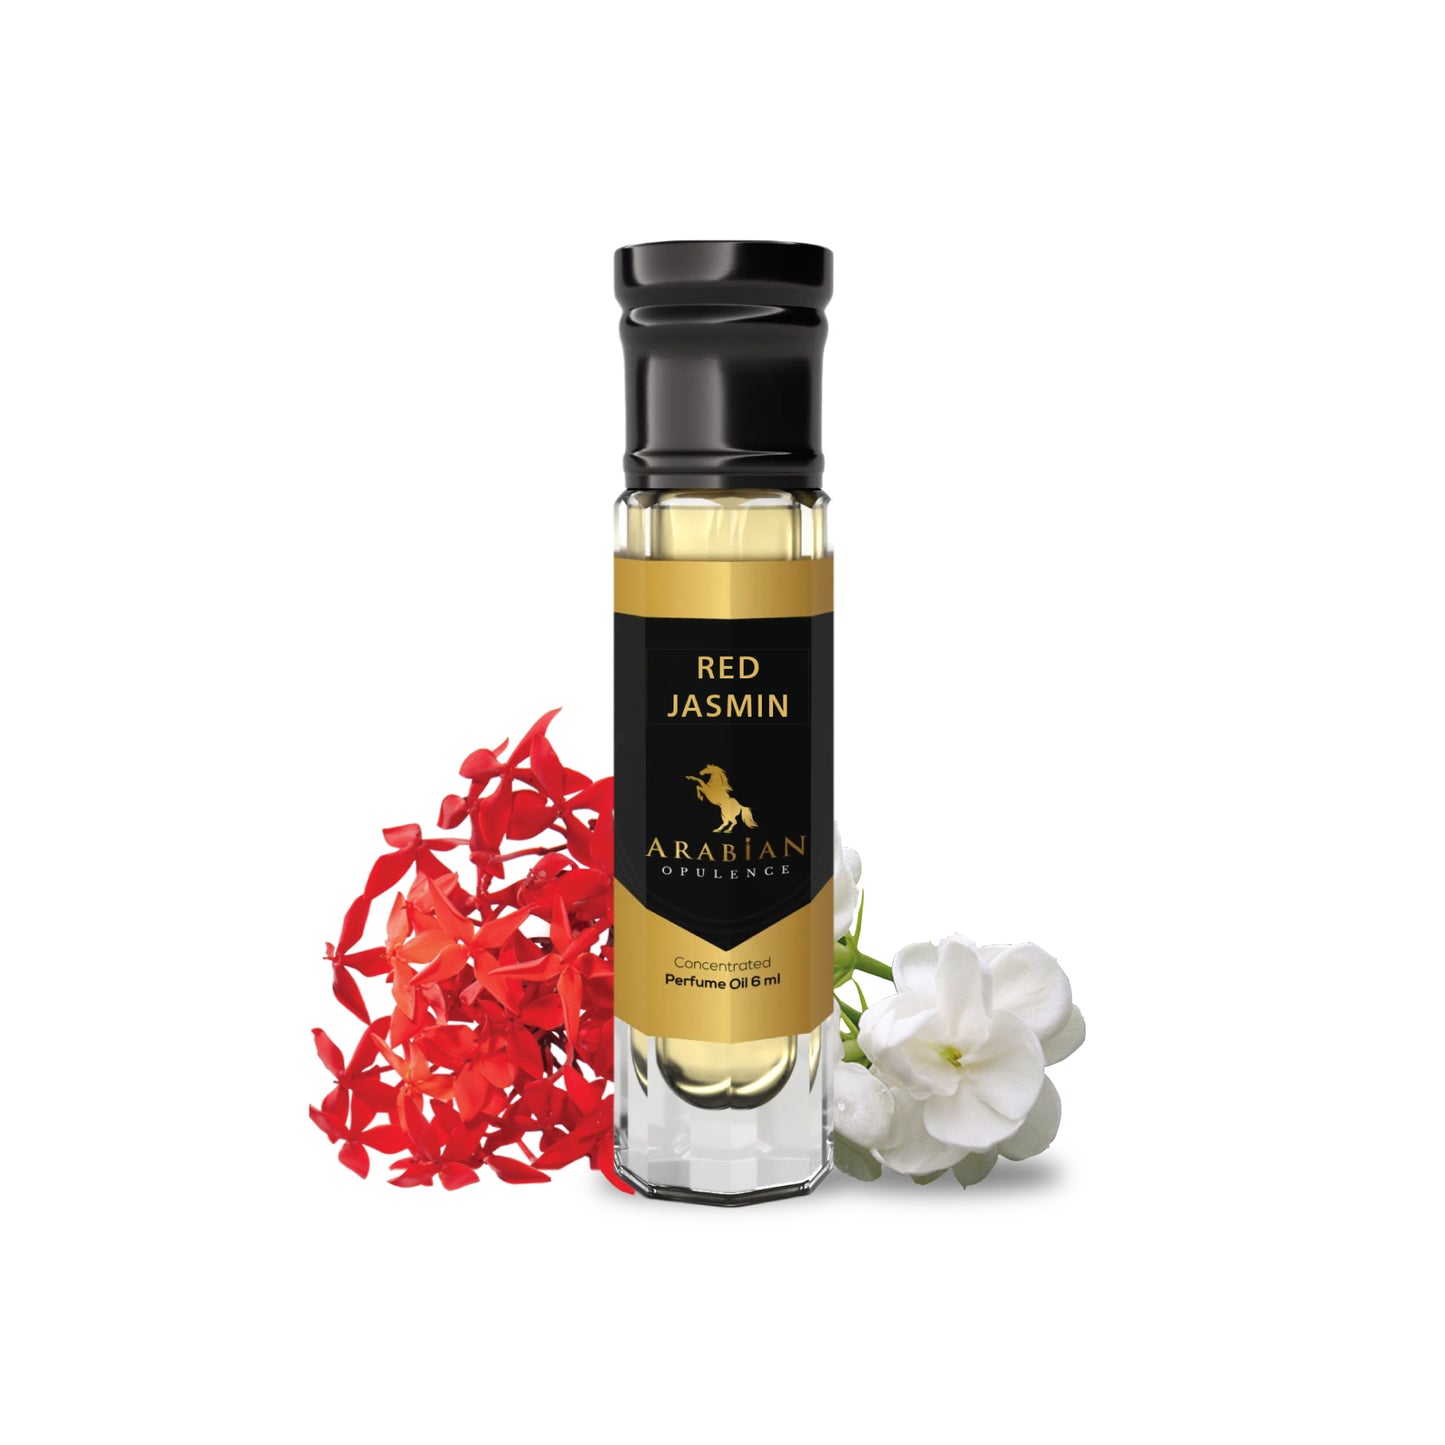 FR162 RED JASMIN FOR HER - Perfume Body Oil - Alcohol Free